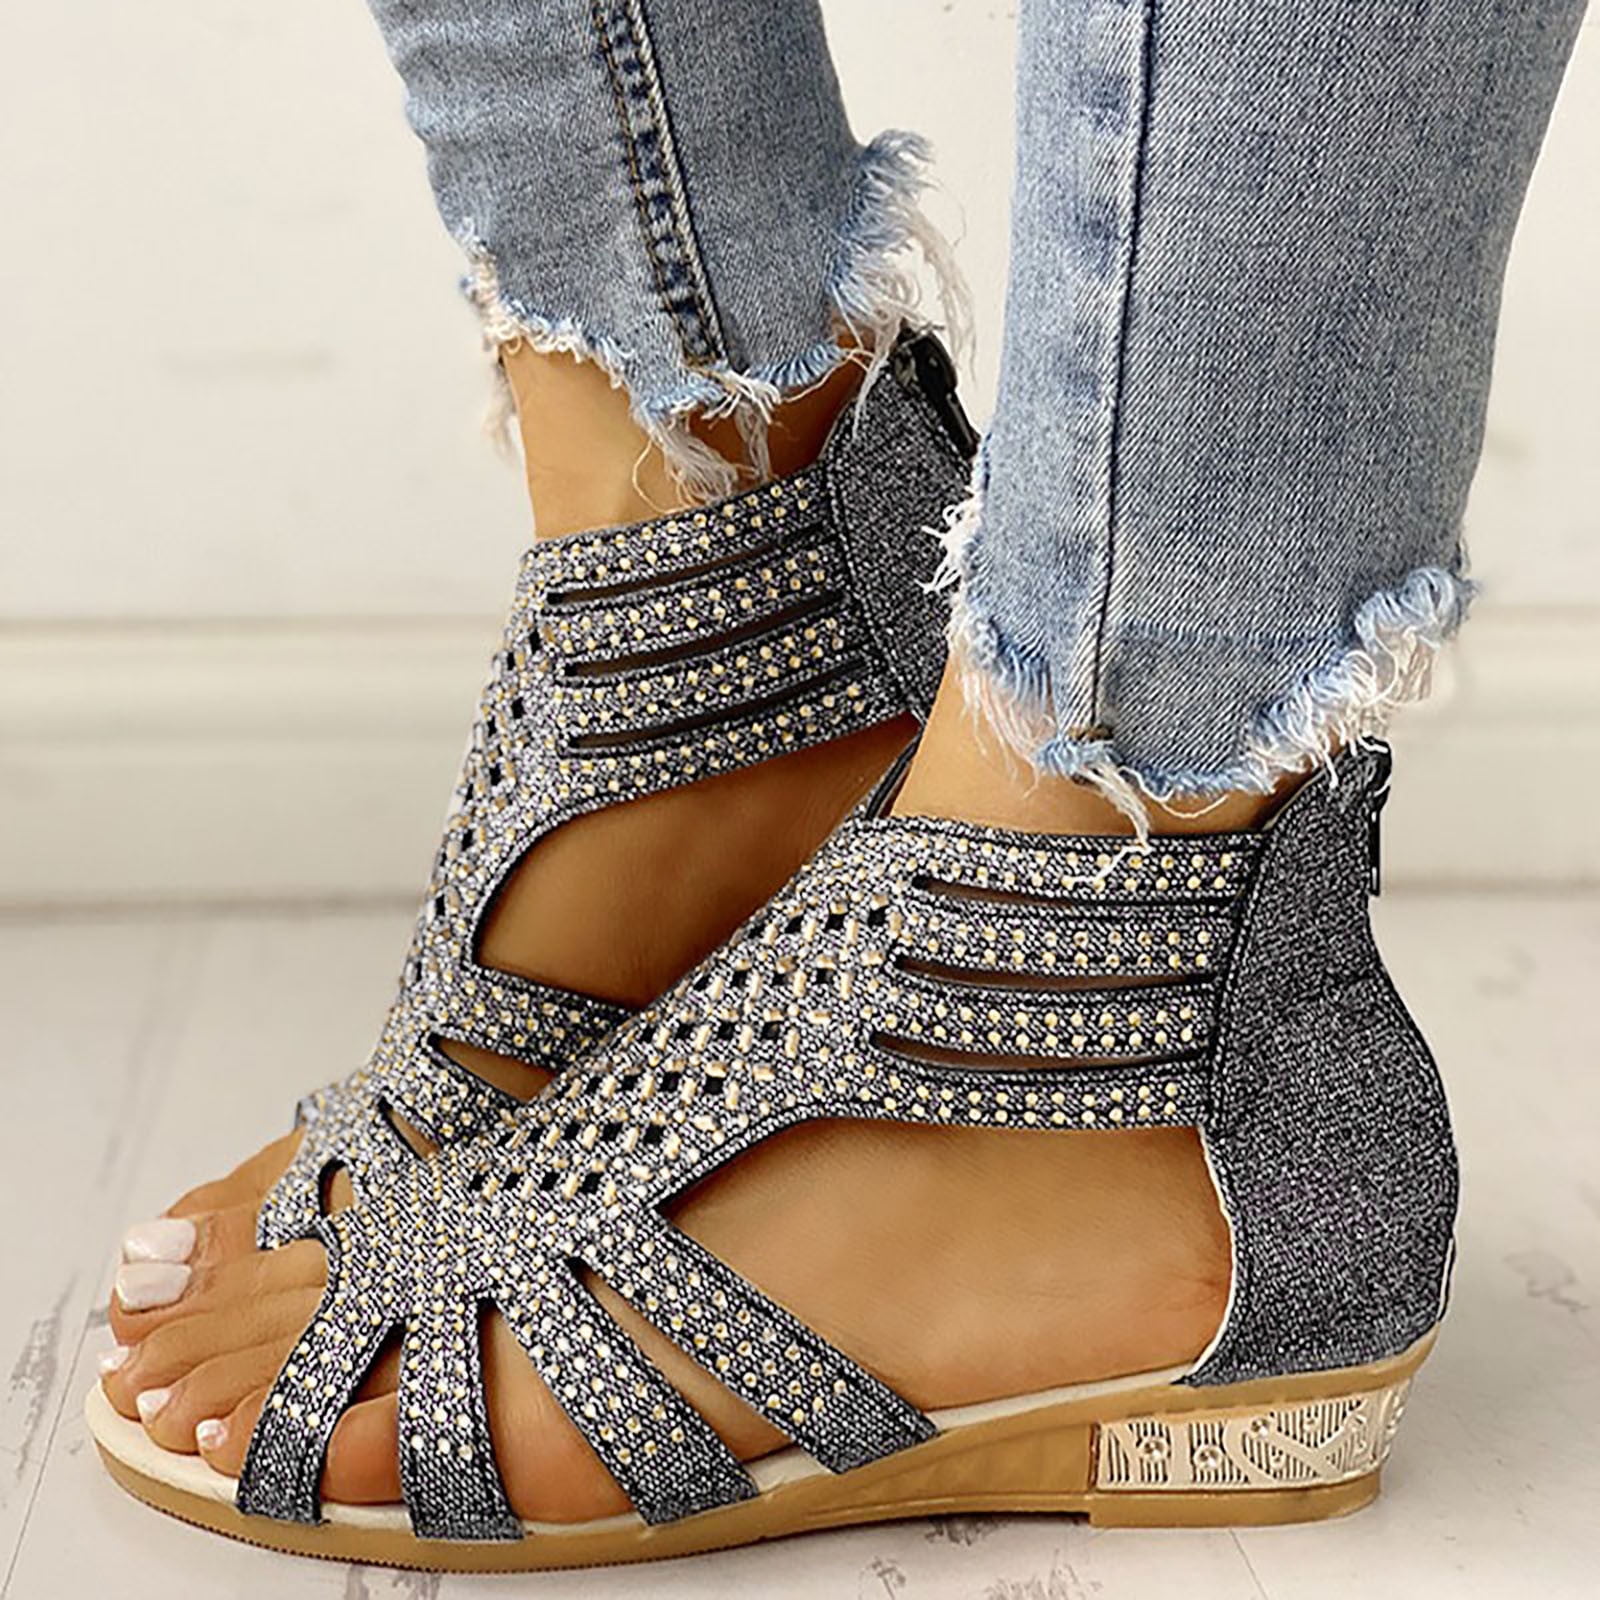 Sole Society Blue Suede Fringe Ankle Strap Flat Zip Up Sandals Womens Size  9 | eBay